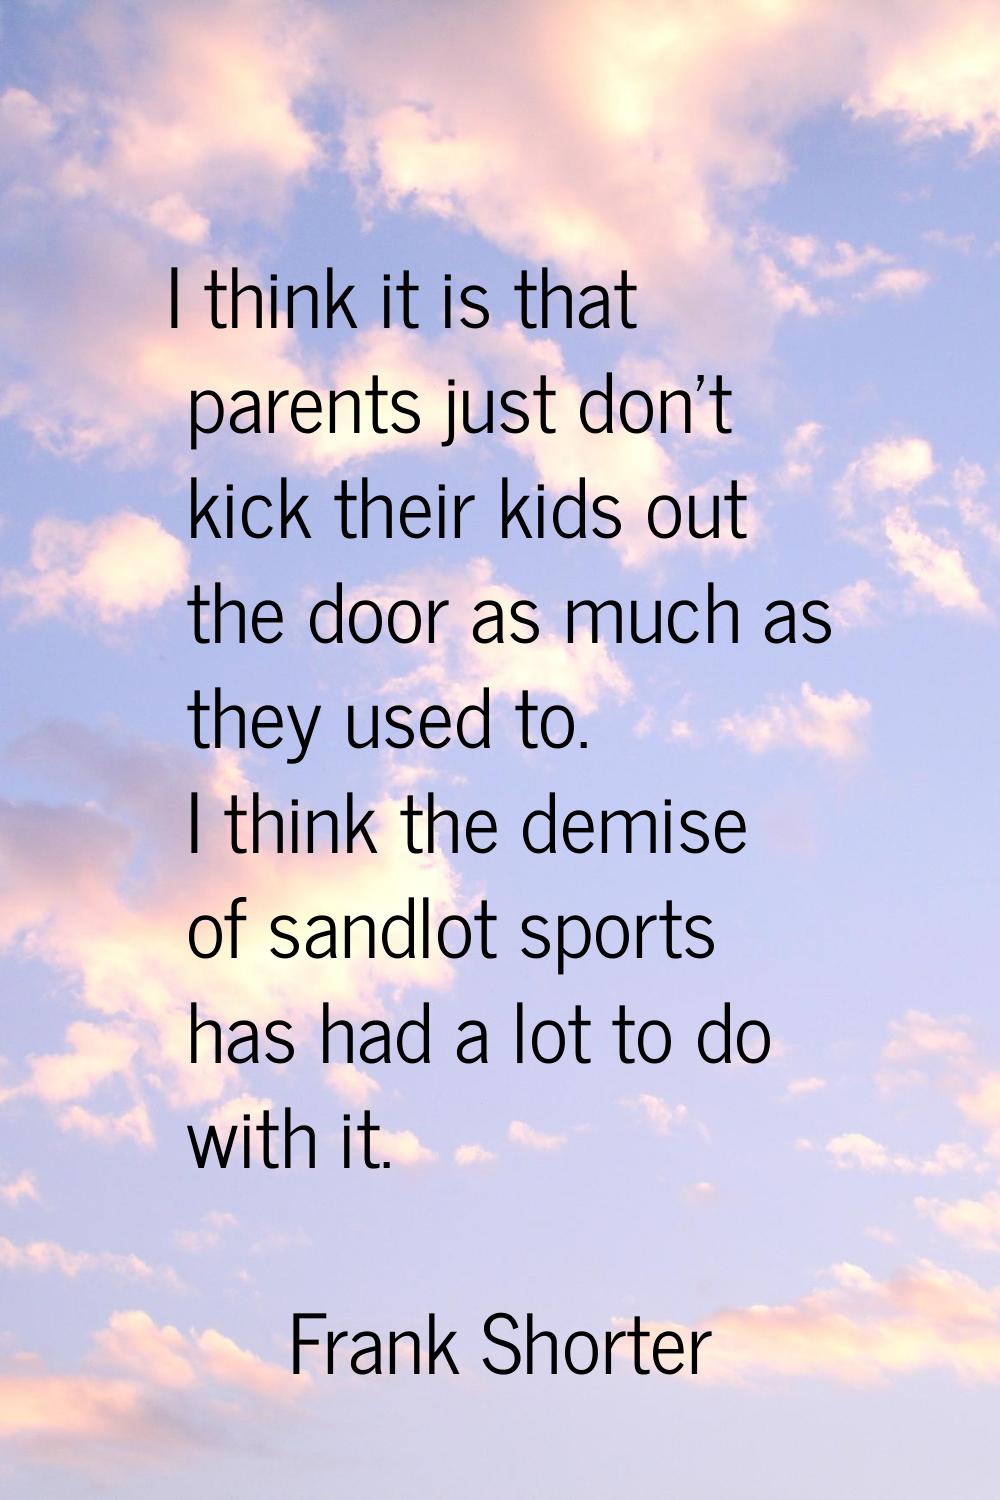 I think it is that parents just don't kick their kids out the door as much as they used to. I think